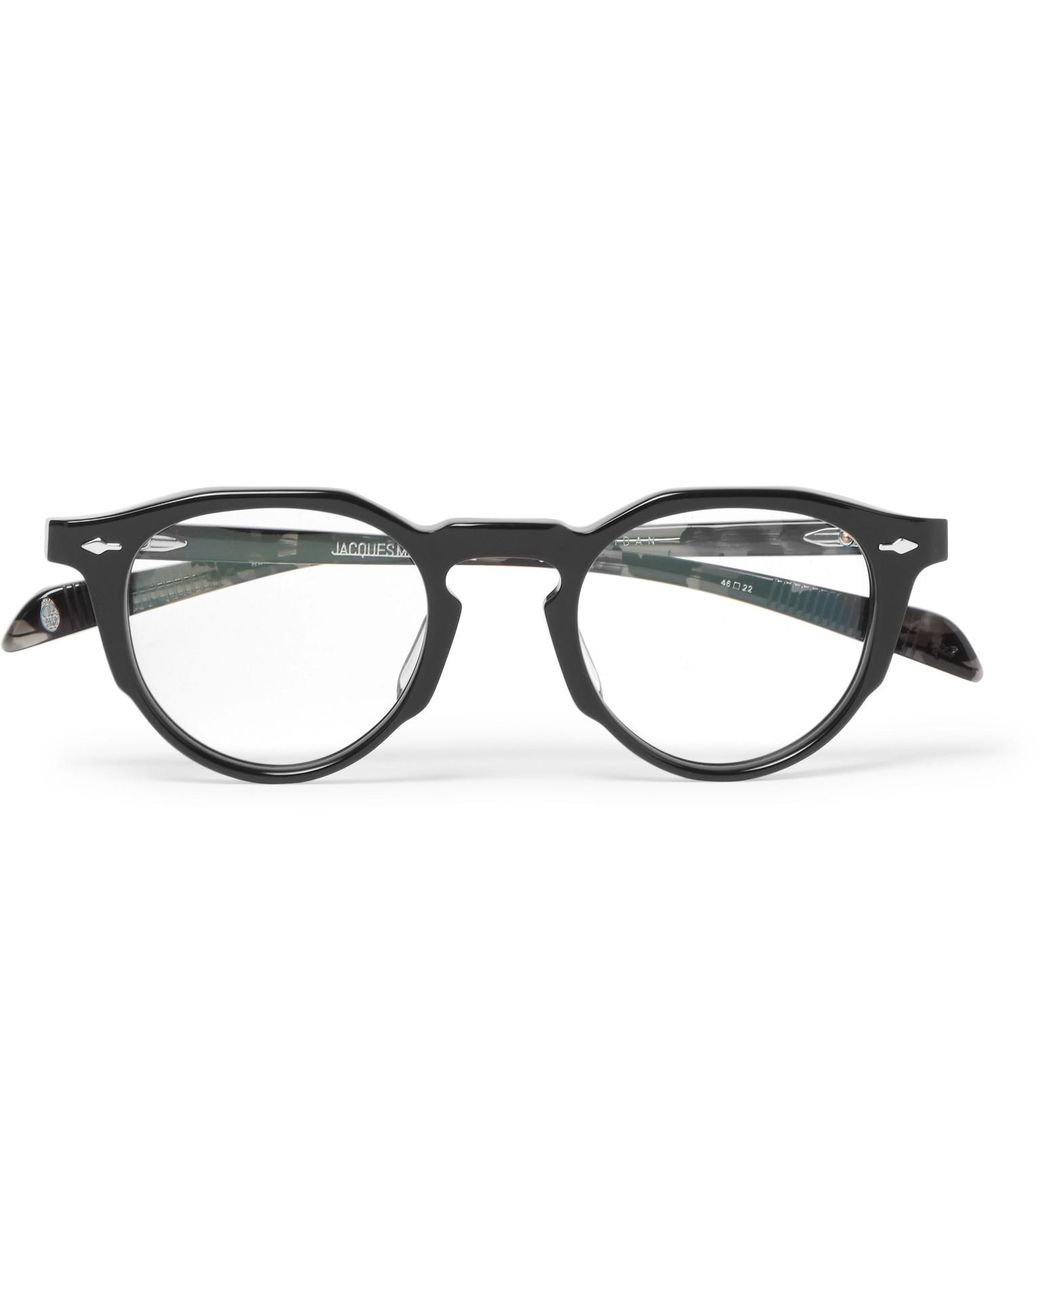 Jacques Marie Mage Sheridan Round-frame Acetate Optical